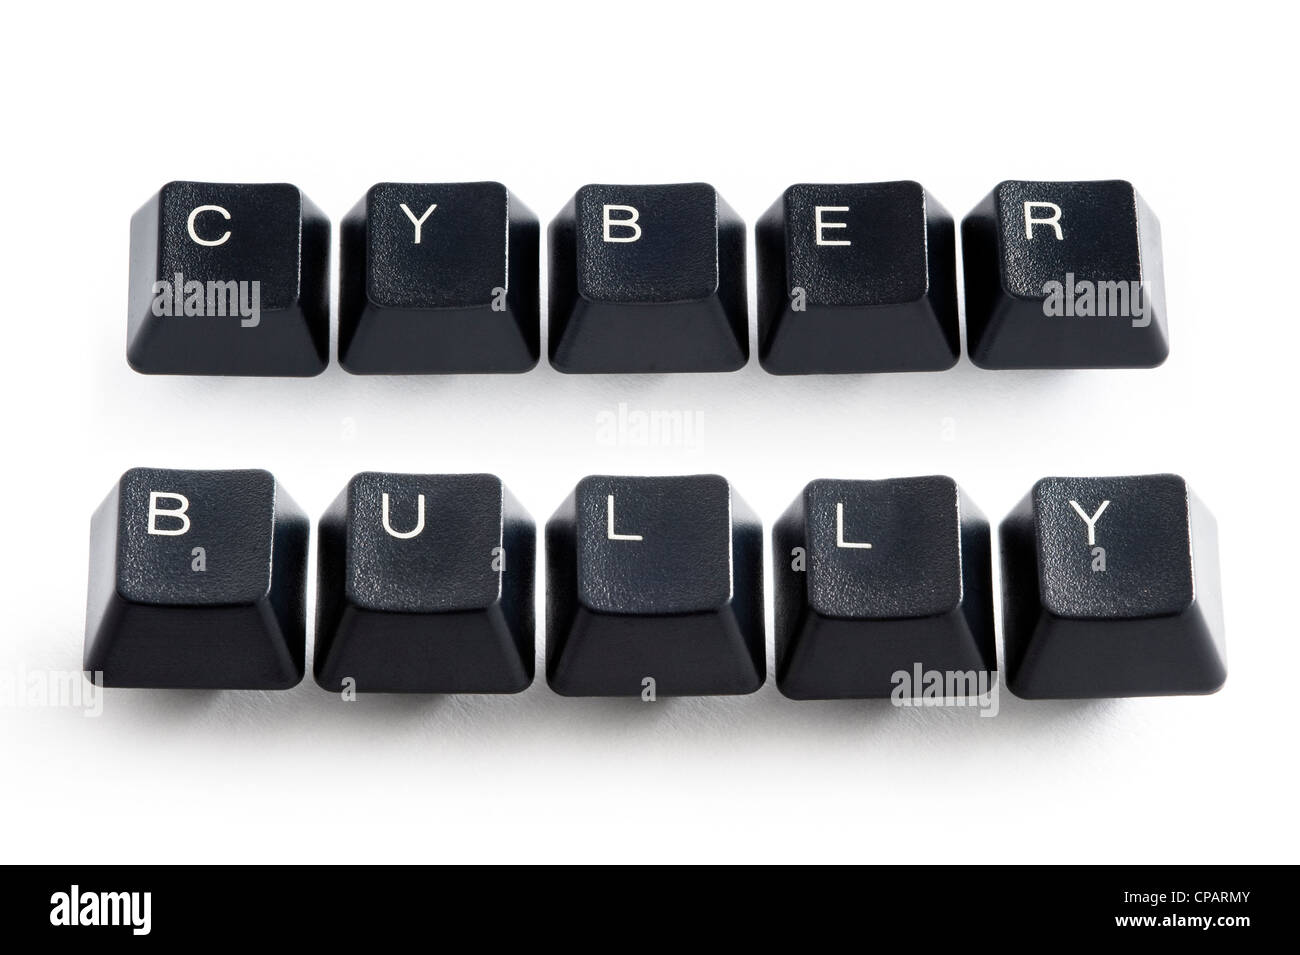 computer keys illustrating the concept of cyber bullying, internet bullying or online bullying Stock Photo